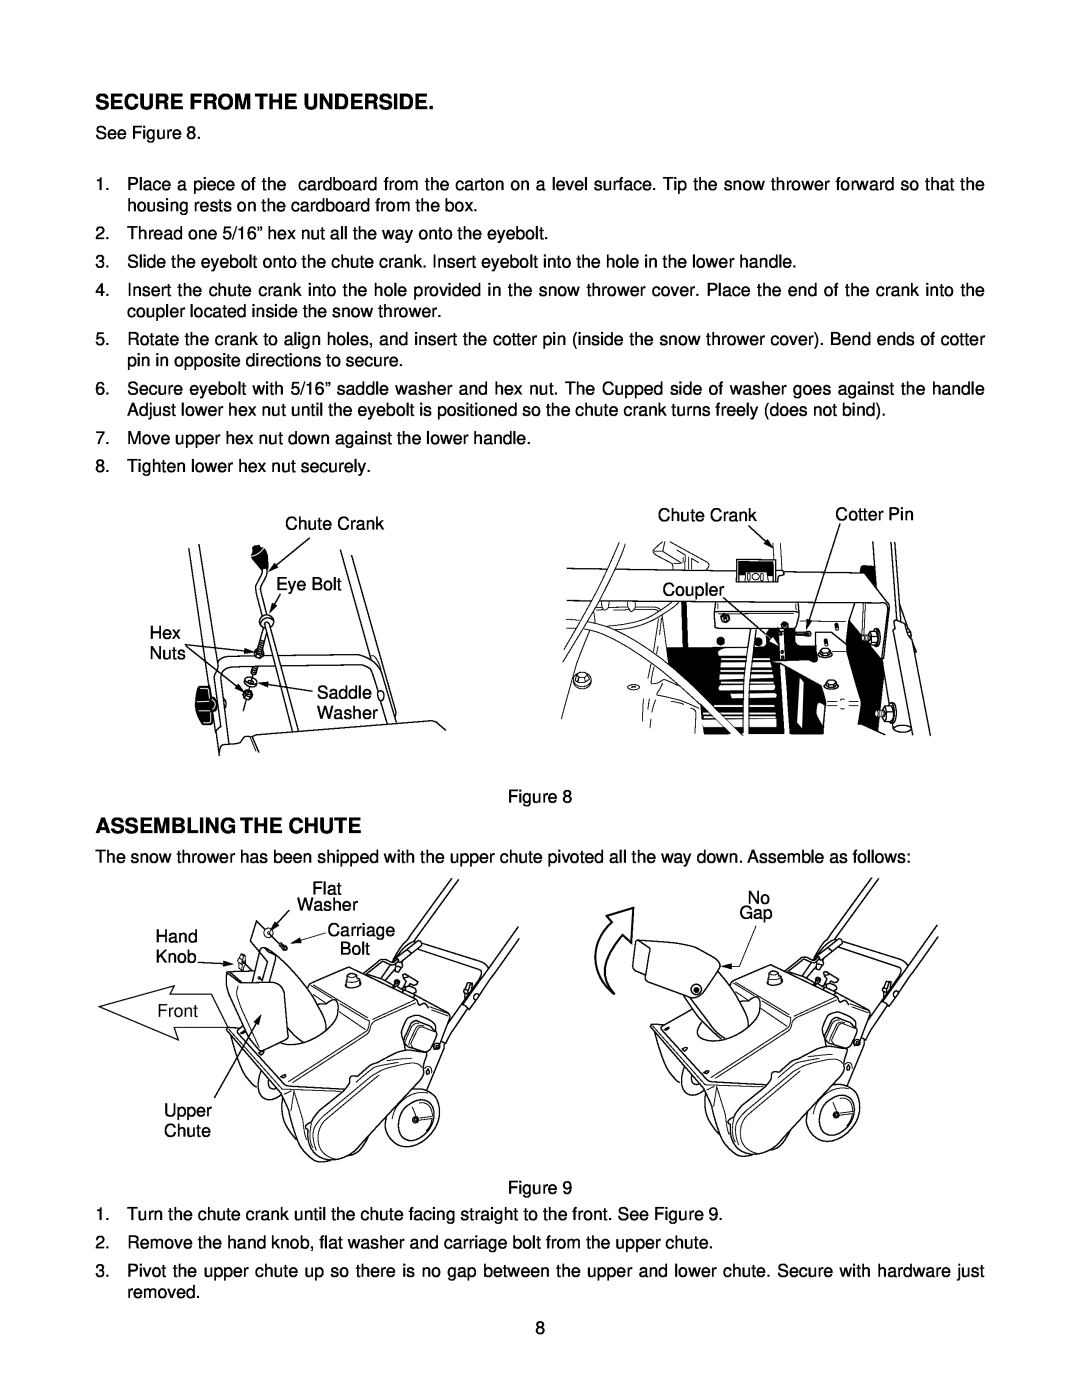 MTD Series 140 thru 152 manual Secure From The Underside, Assembling The Chute 